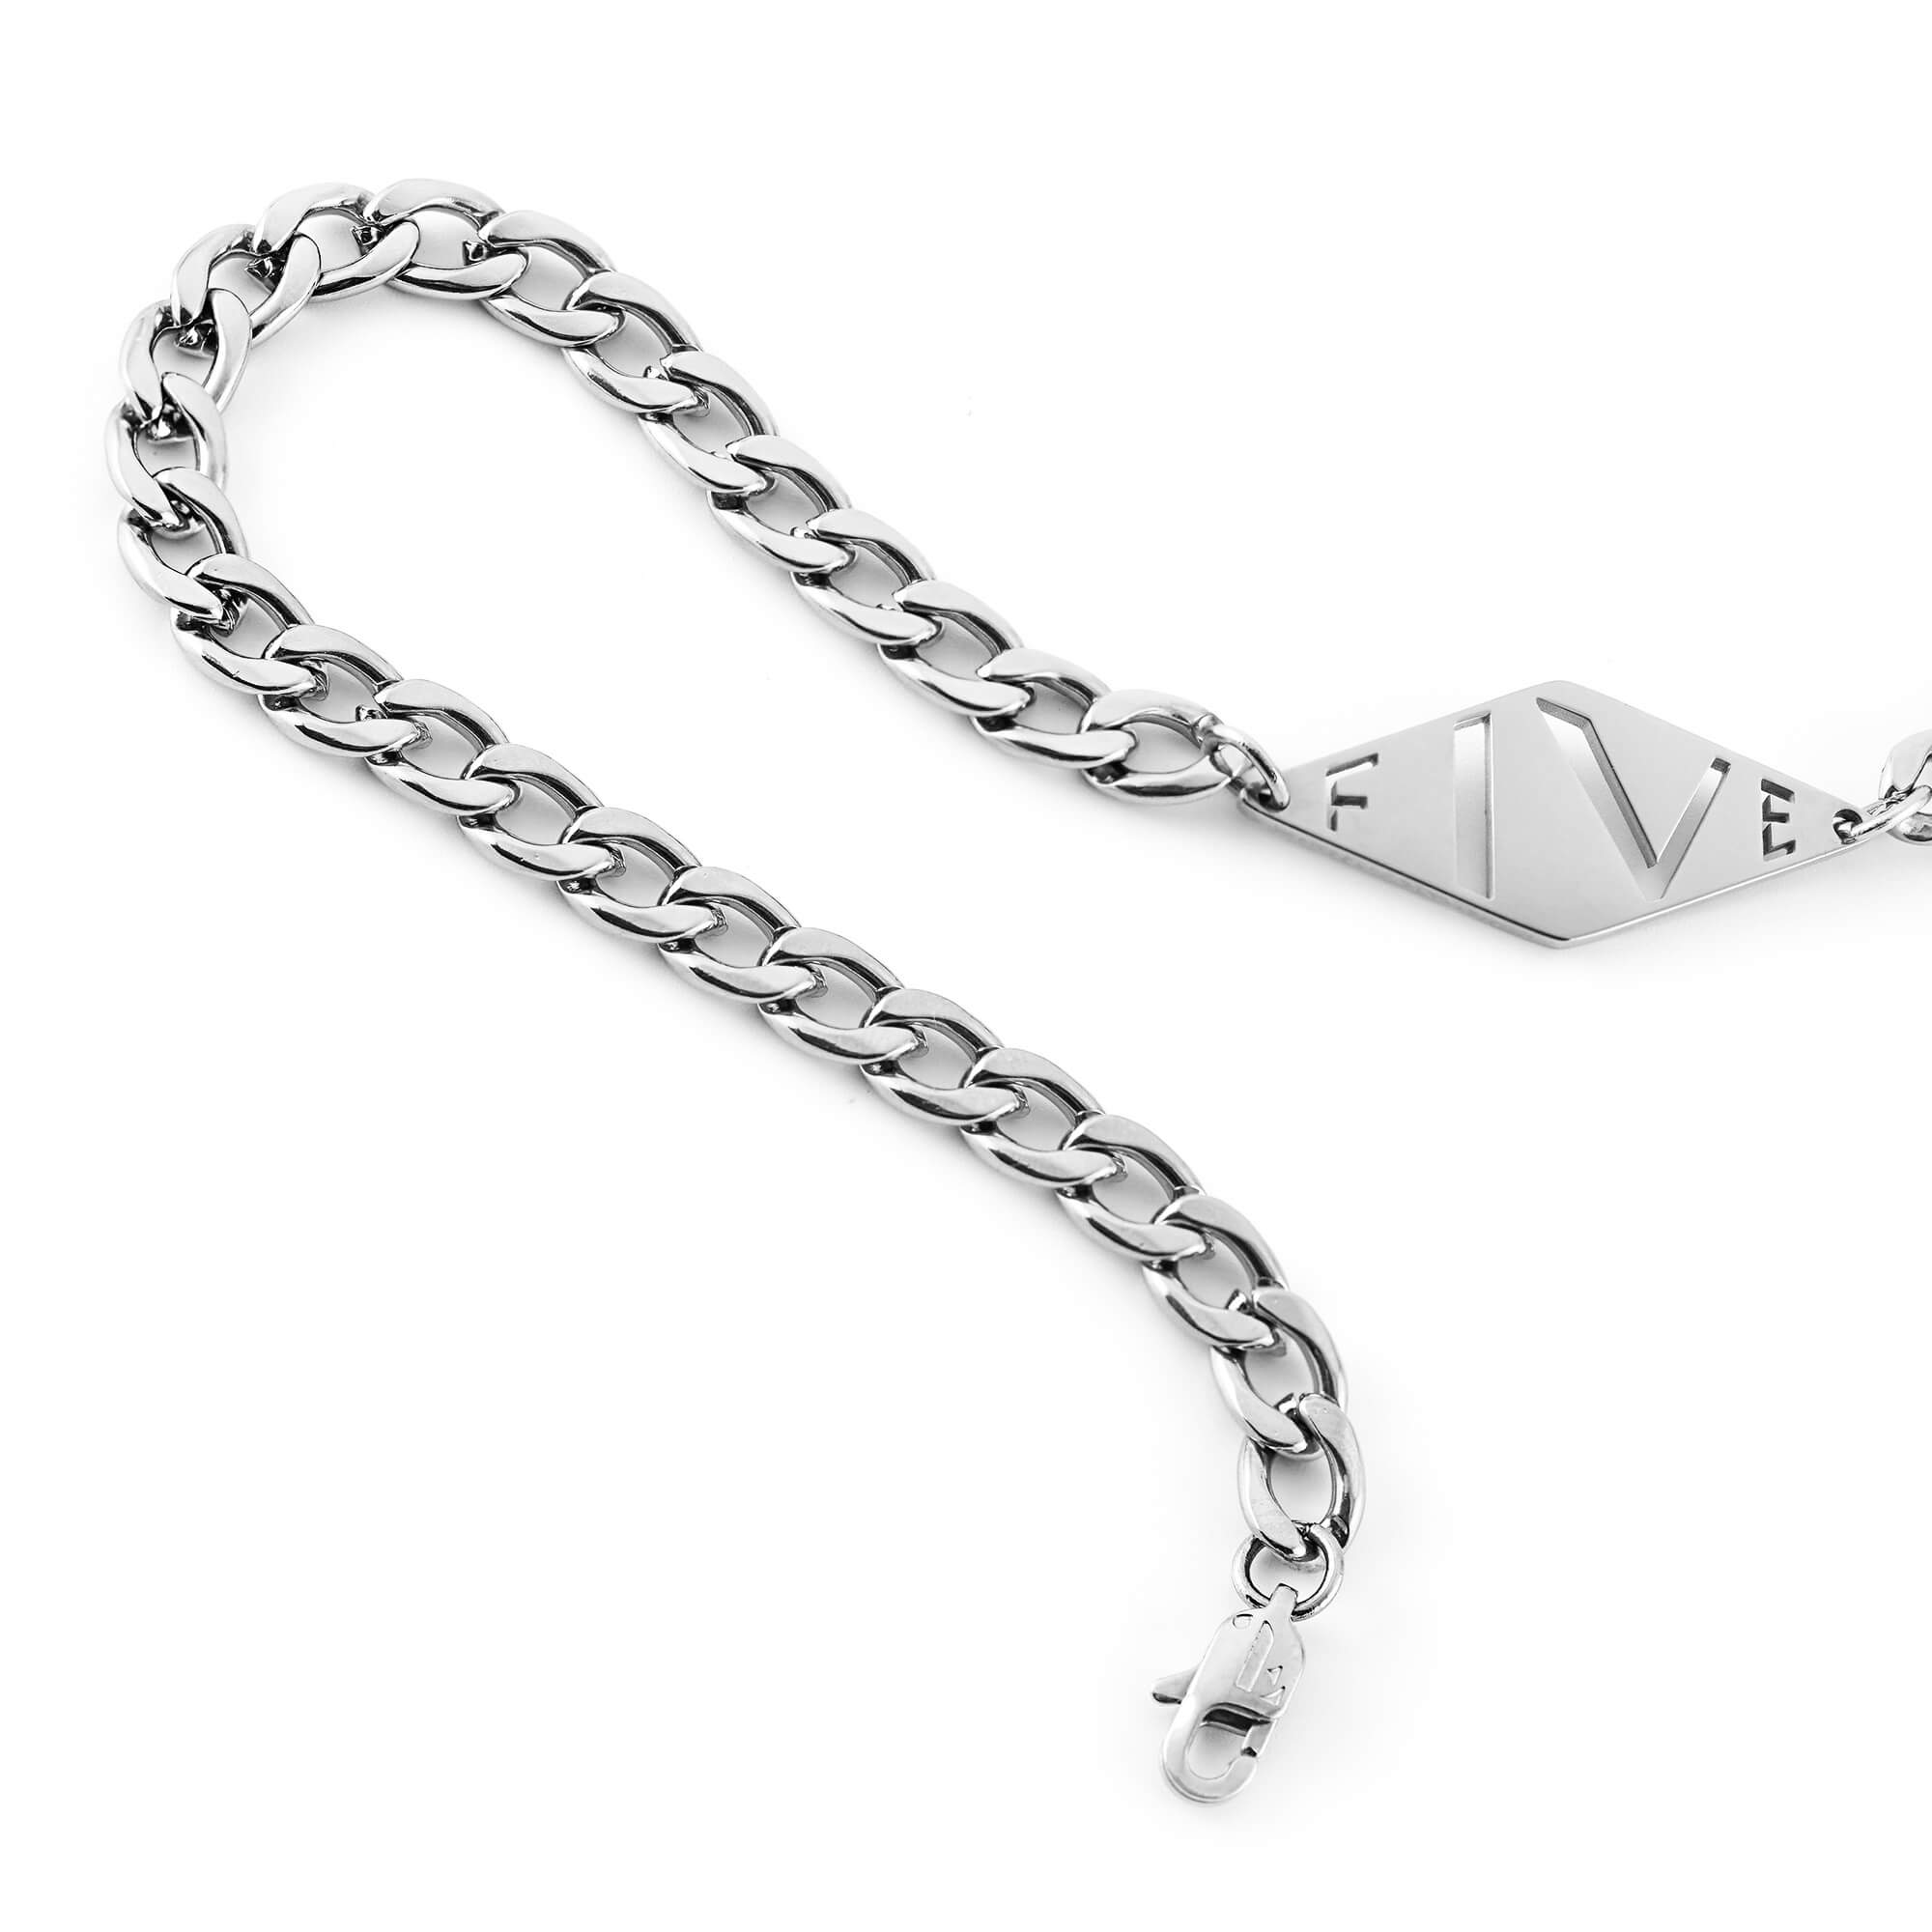 Stainless Steel Men's Large Box Link Necklace Chain